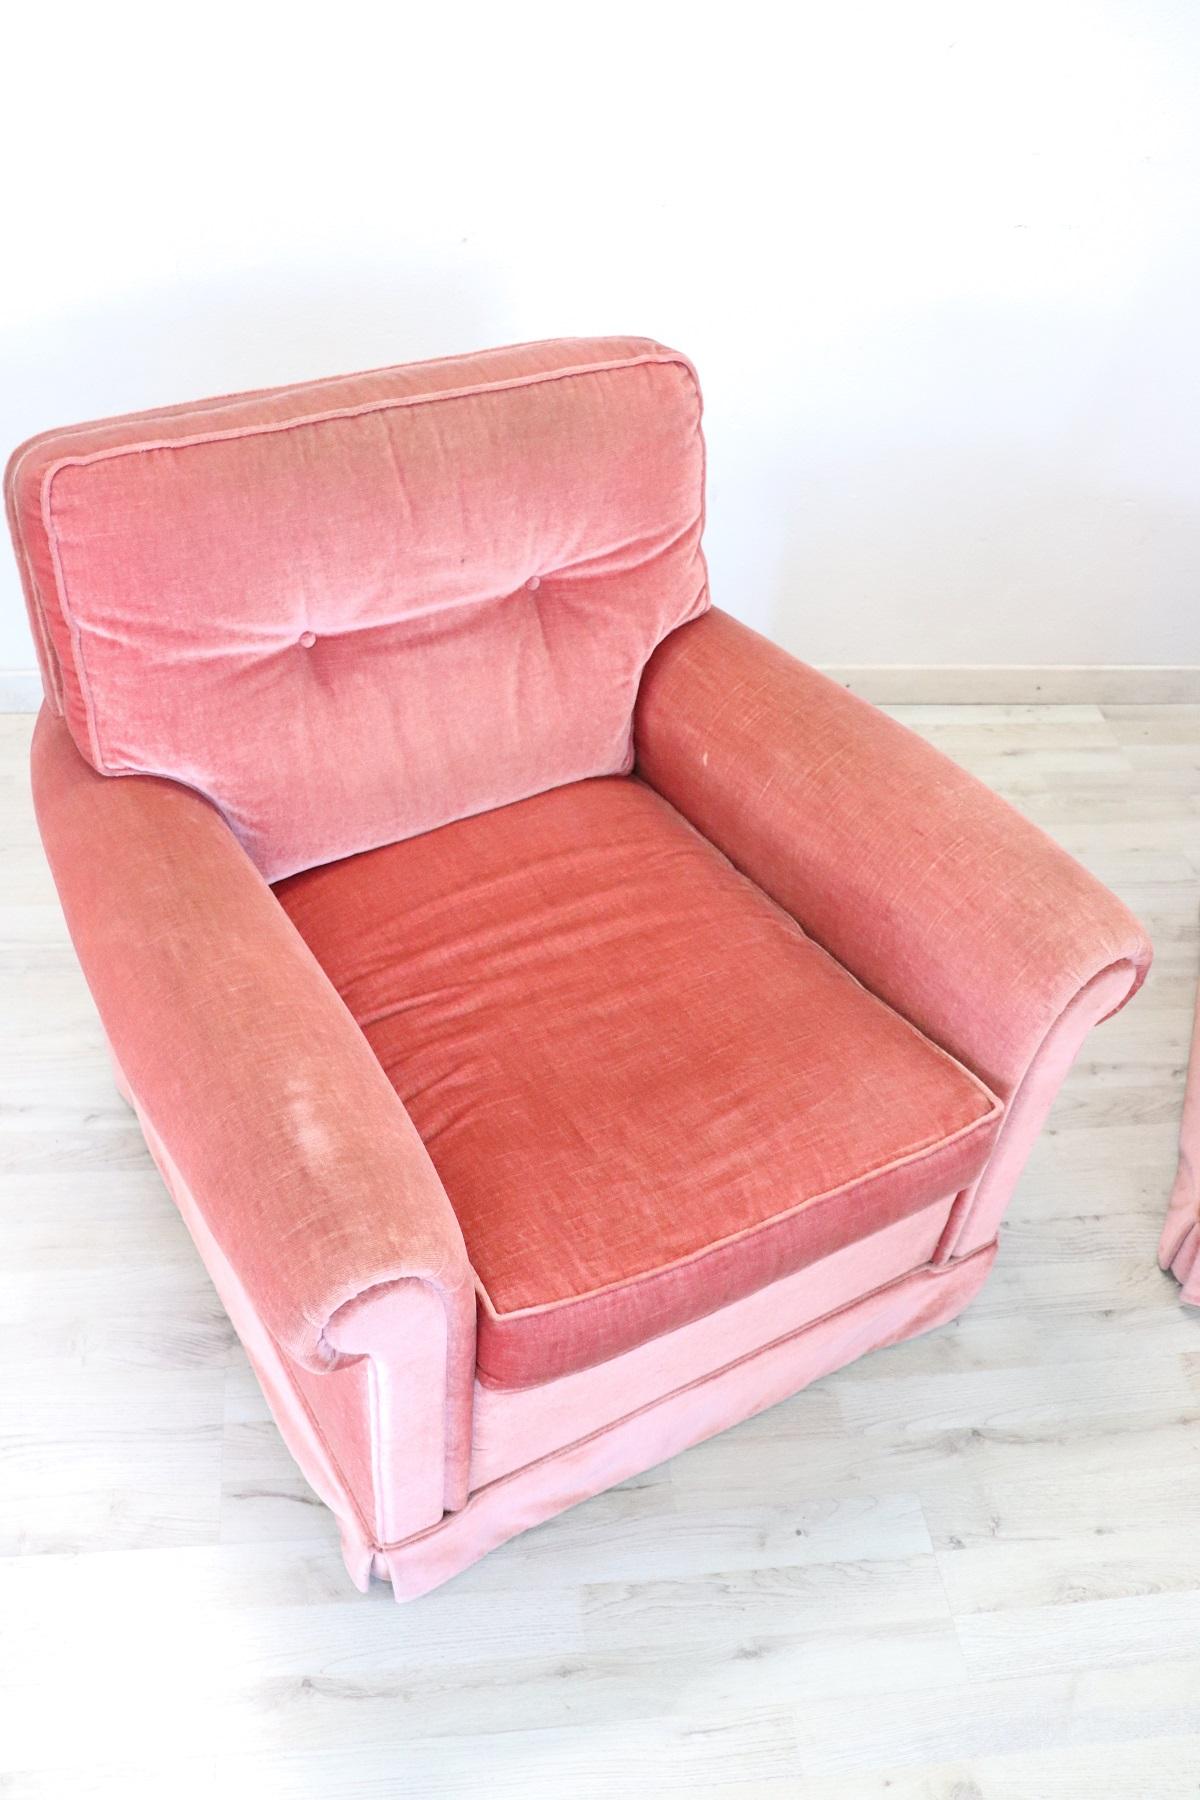 Italian pair of armchairs very comfortable with pink velvet. Used but in good condition ready to be used in your beautiful home. This armchair is perfect for relaxing moments.